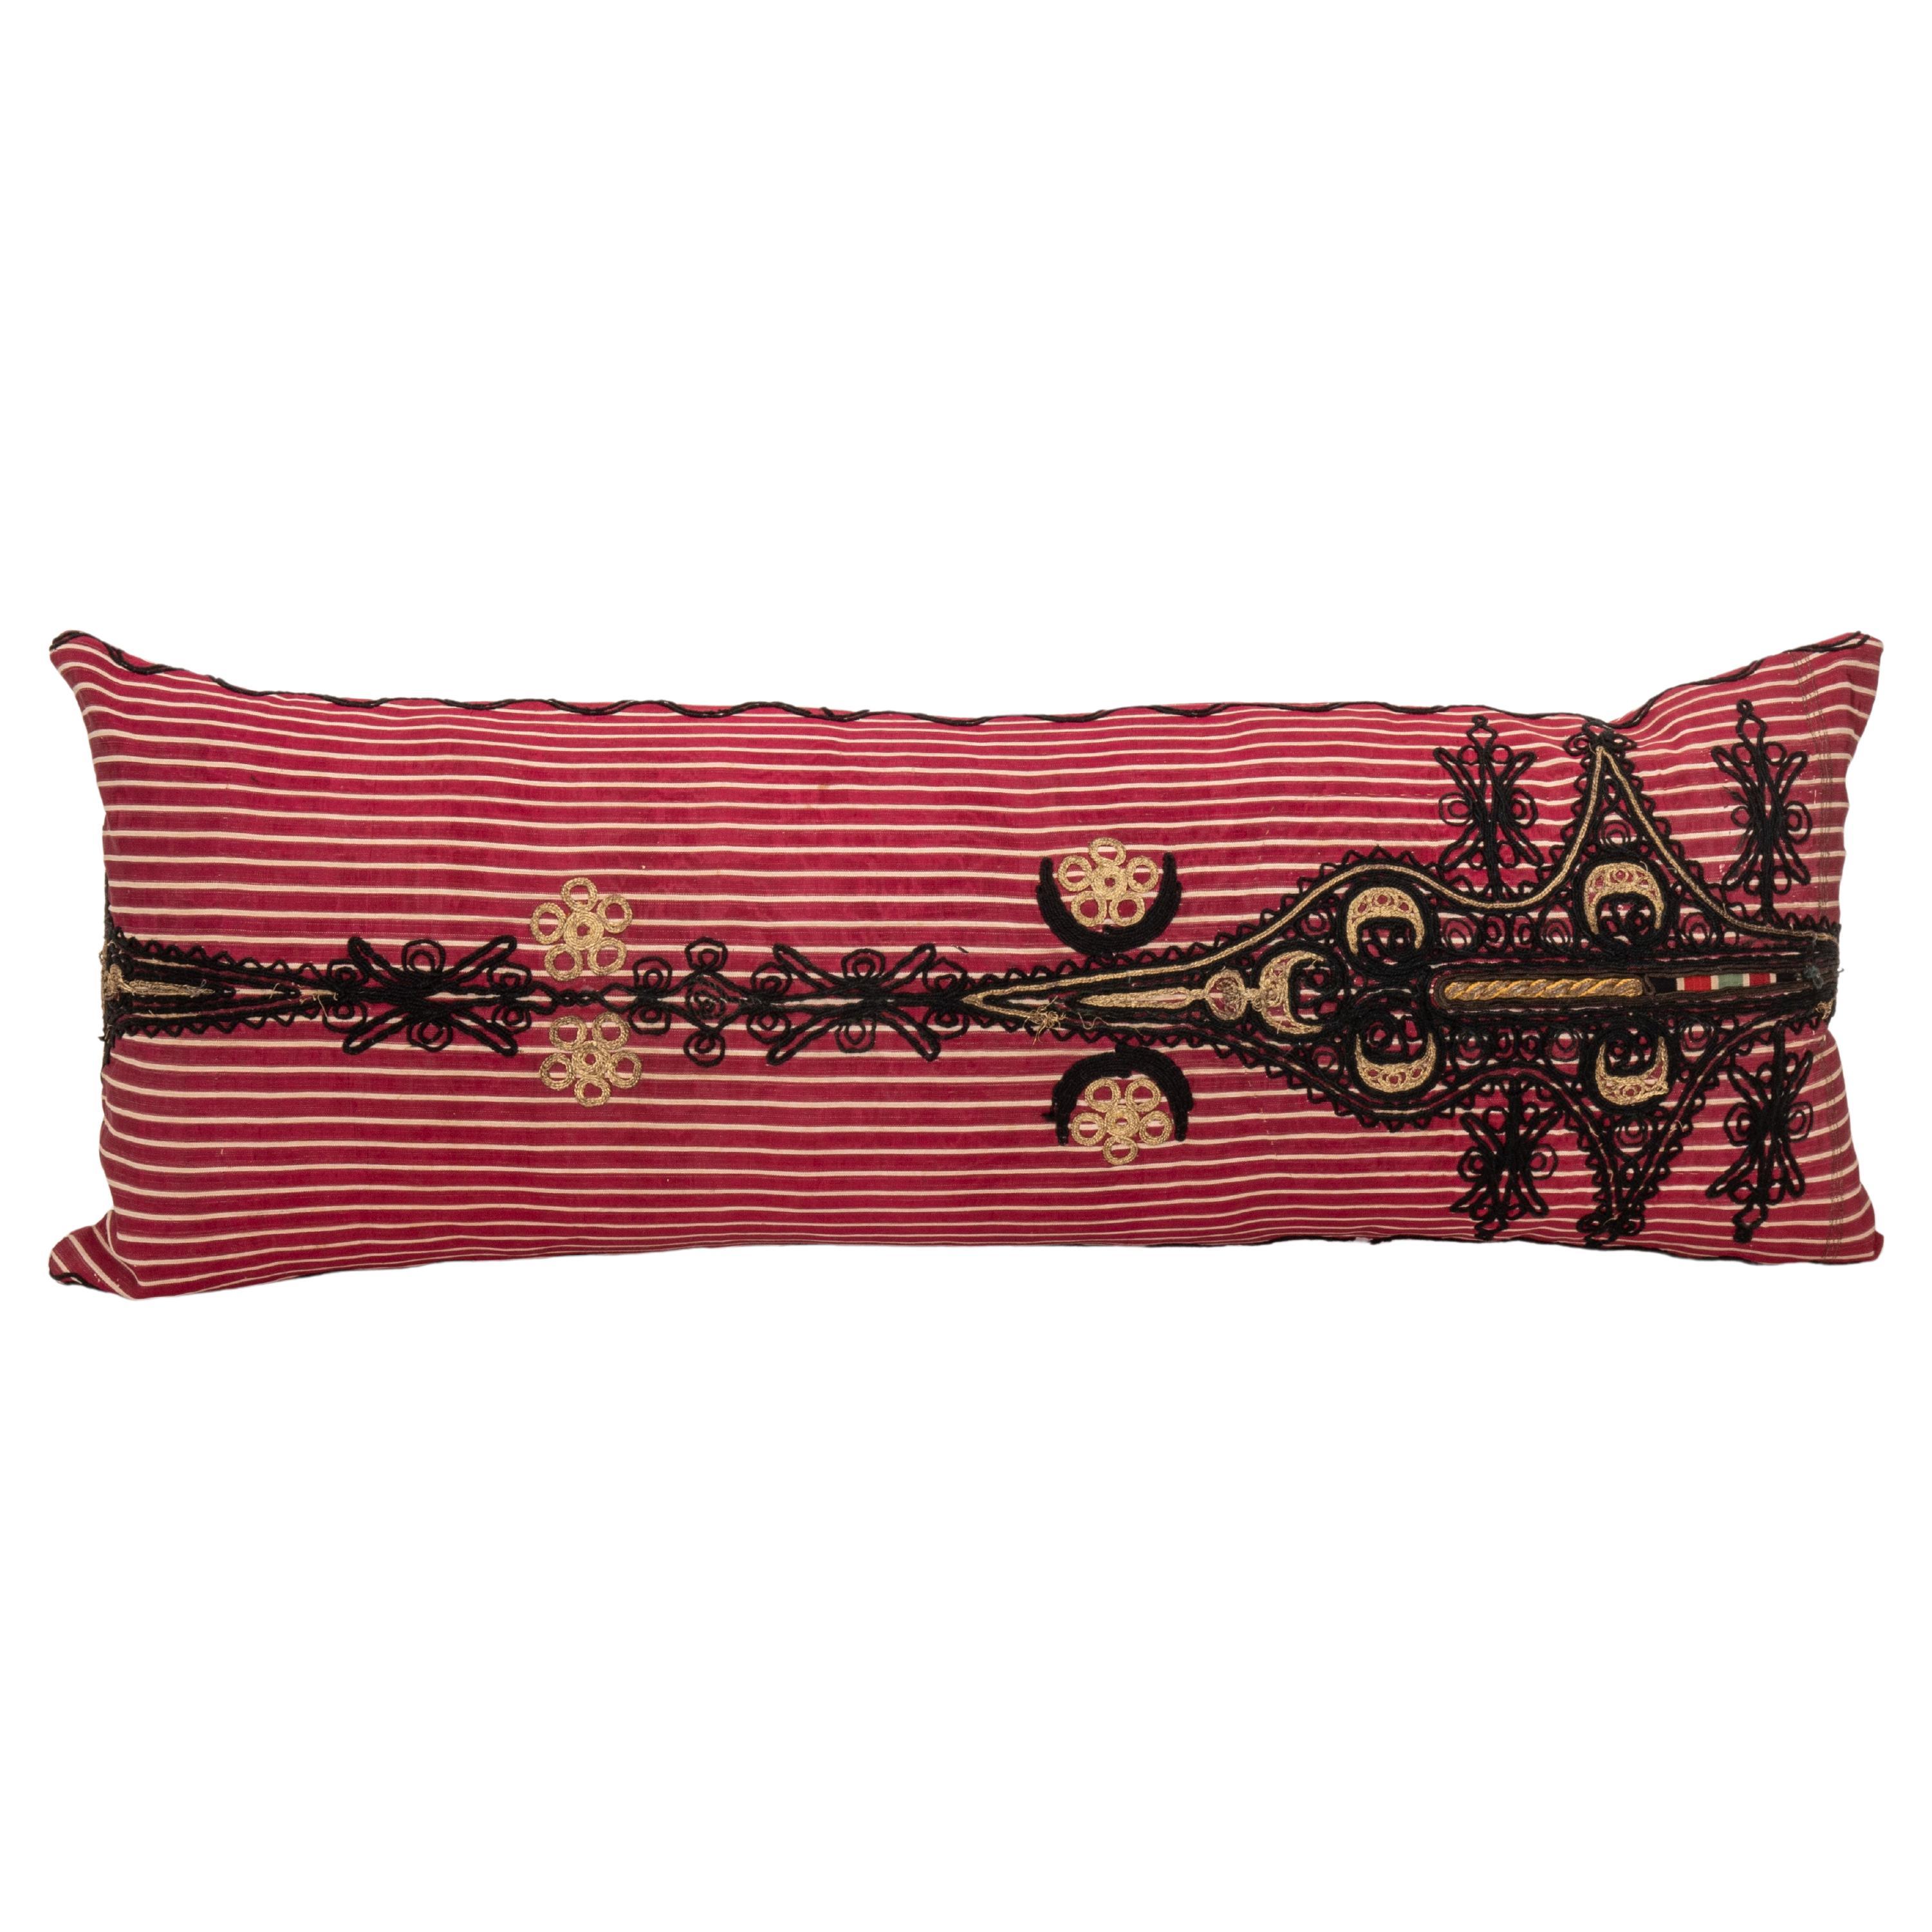 Antique Ottoman Turkish Pillow Case, Early 20th C. For Sale